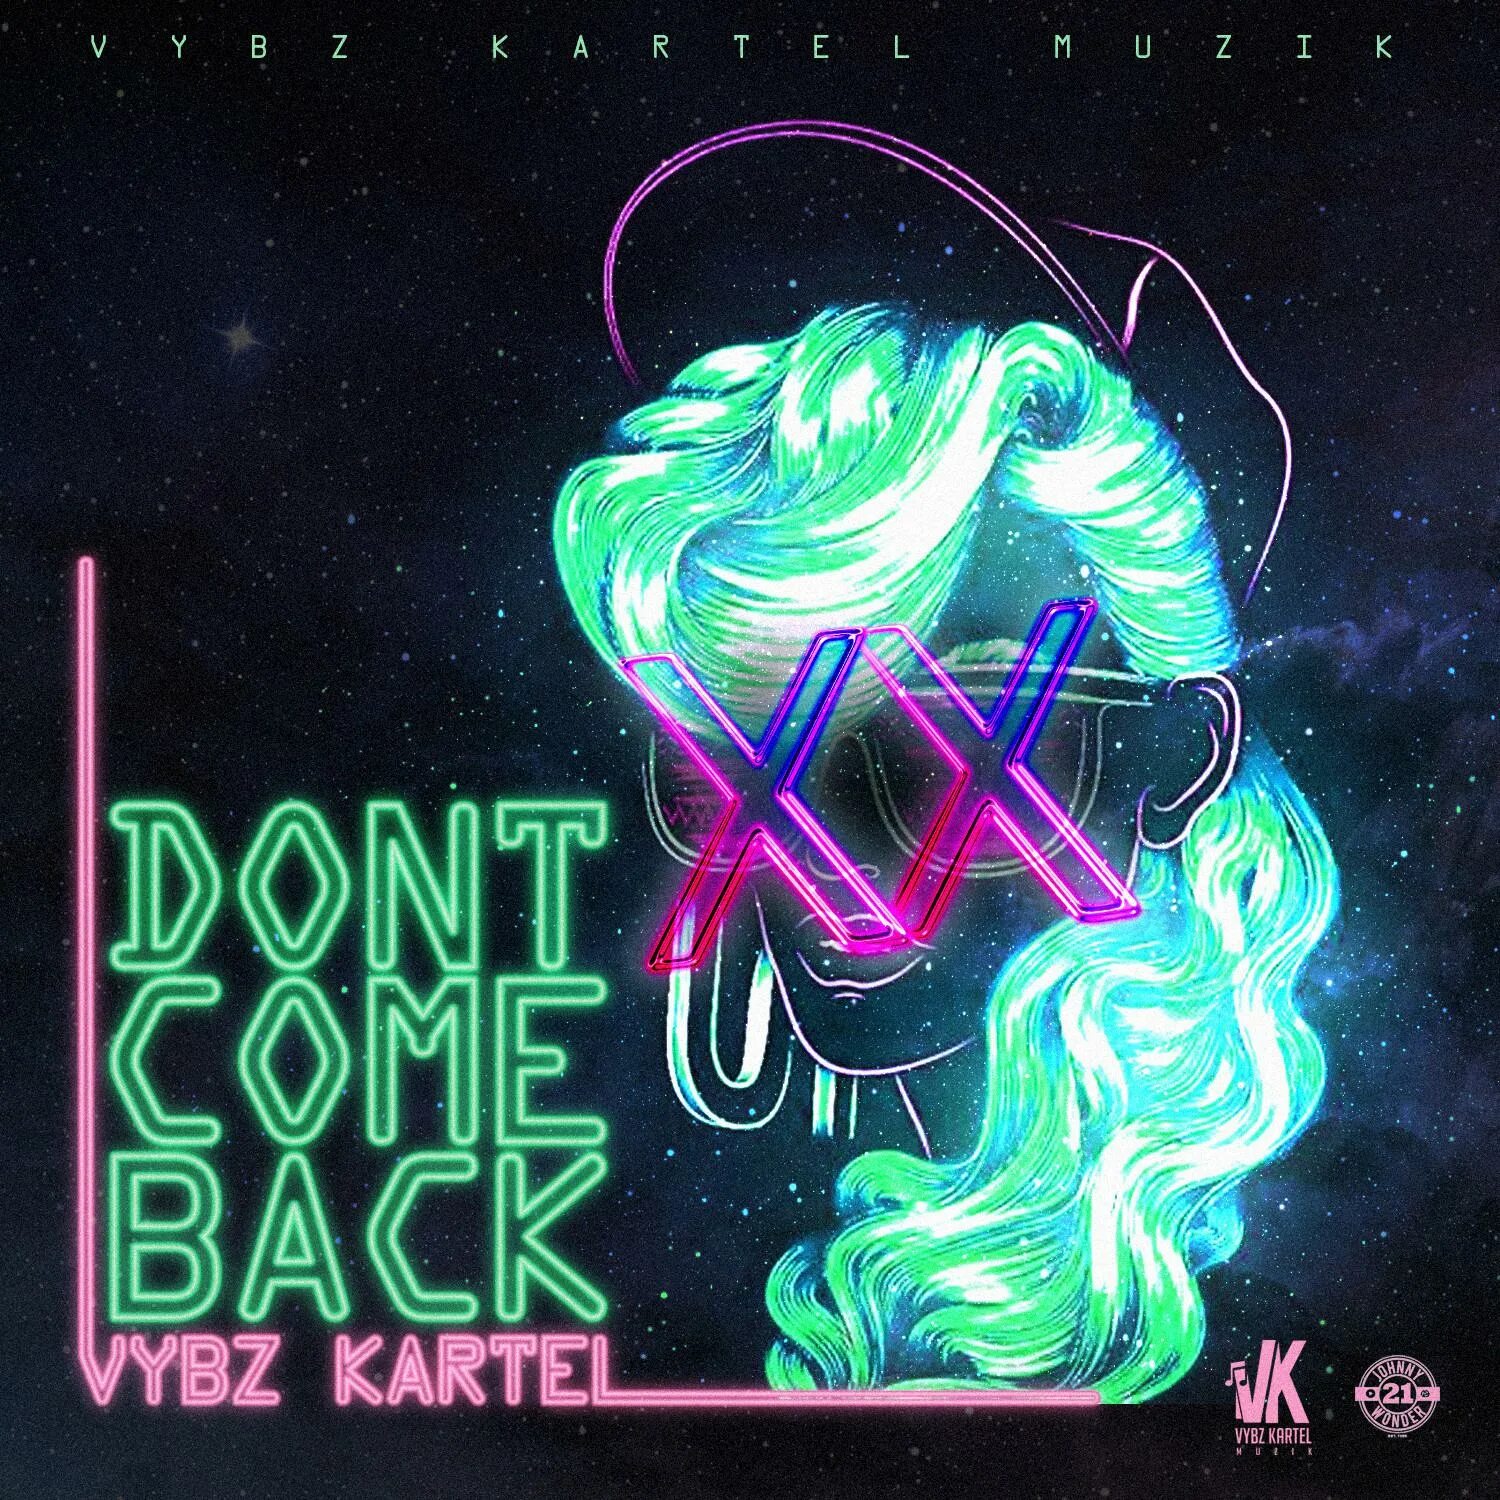 Don't come back. Vybz Kartel back way. Can t come back